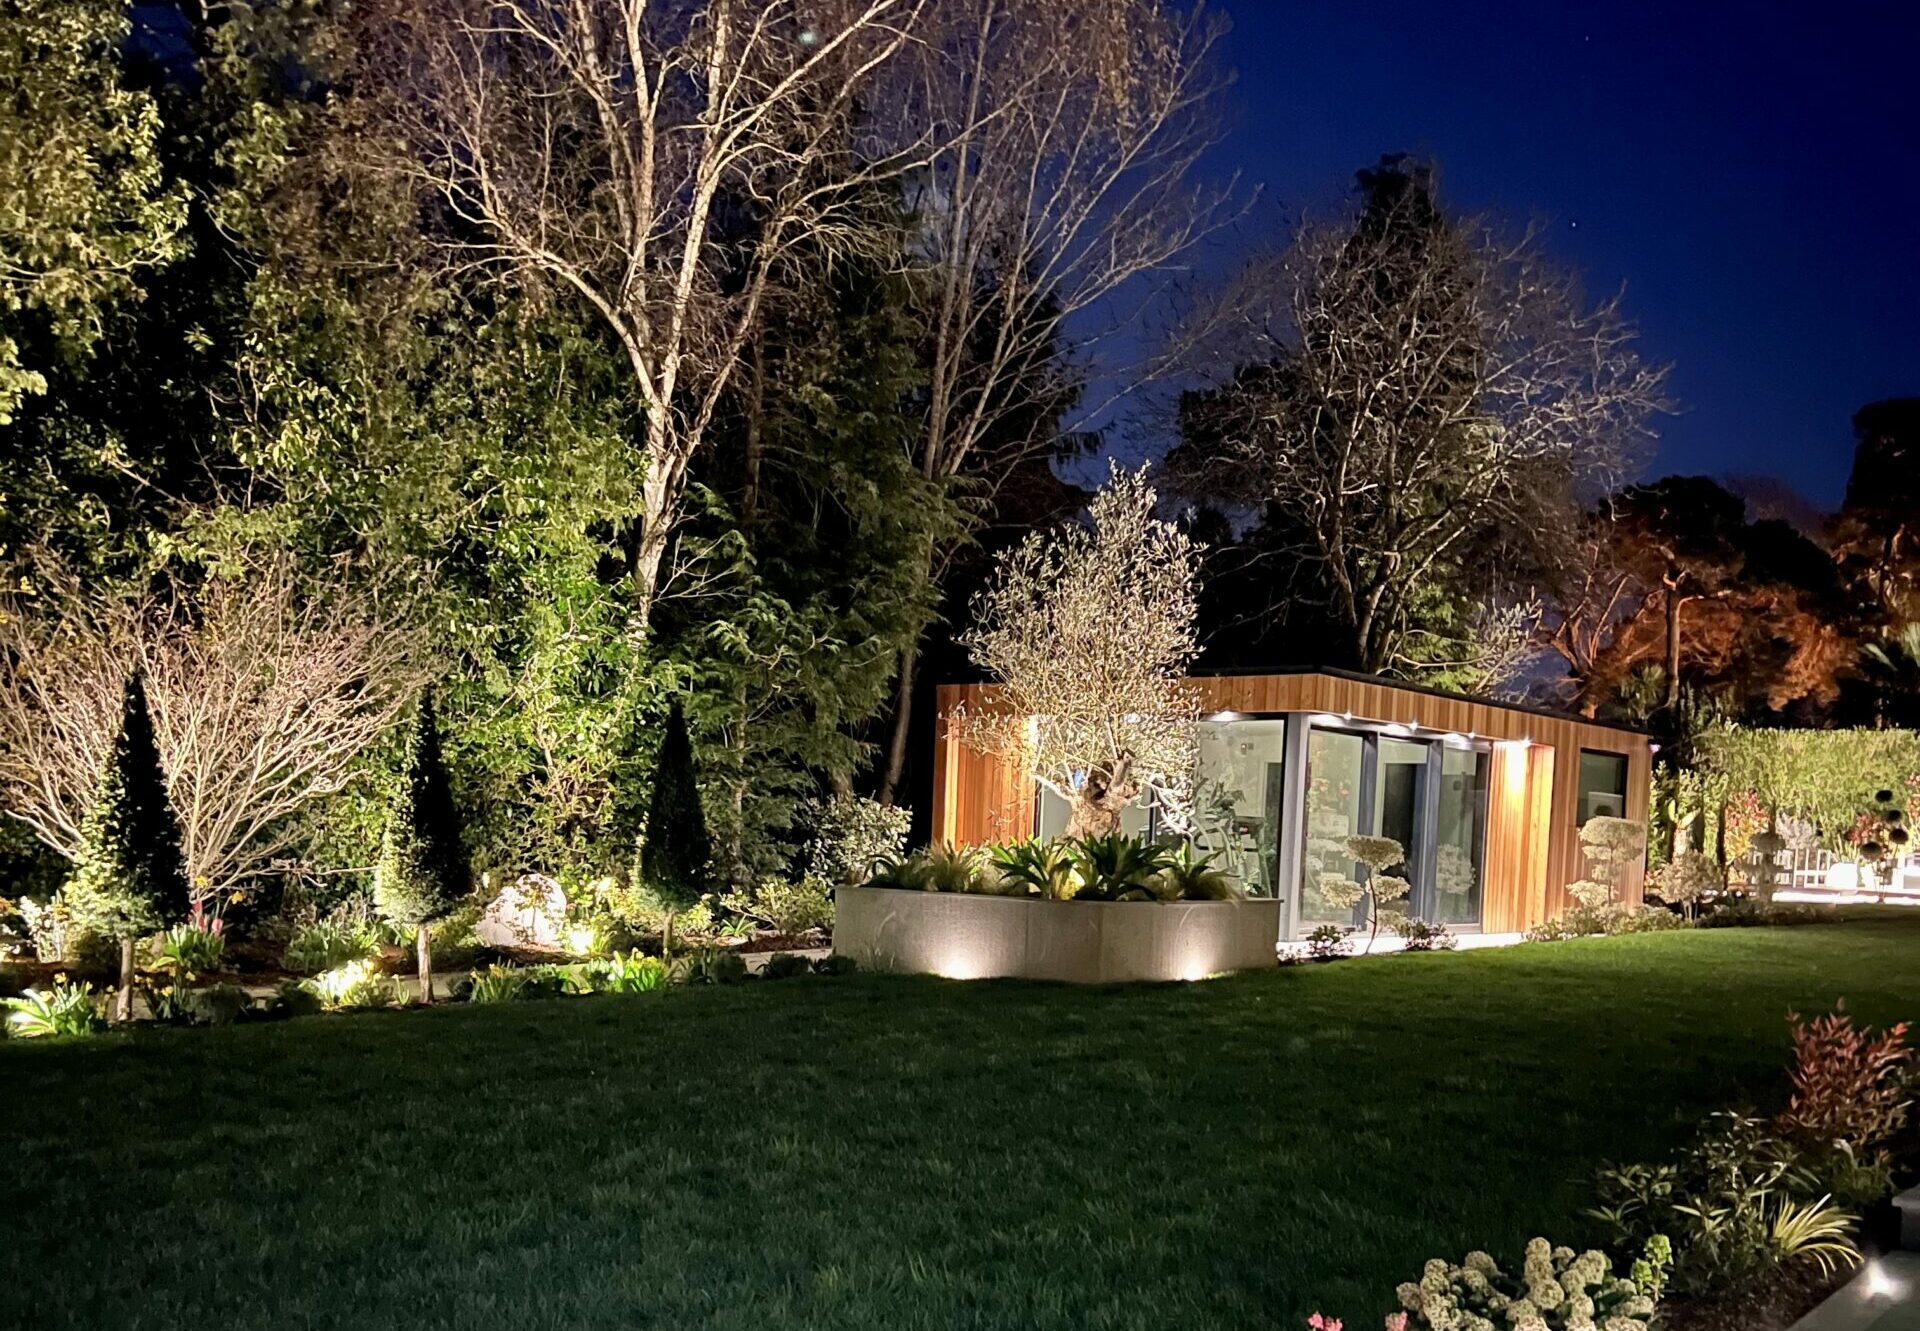 Exterior night view of a Vivid Green garden gym with a flat roof, grey framed corner glass sliding doors, surrounded by a tiled patio, trees in the background, and lush foliage